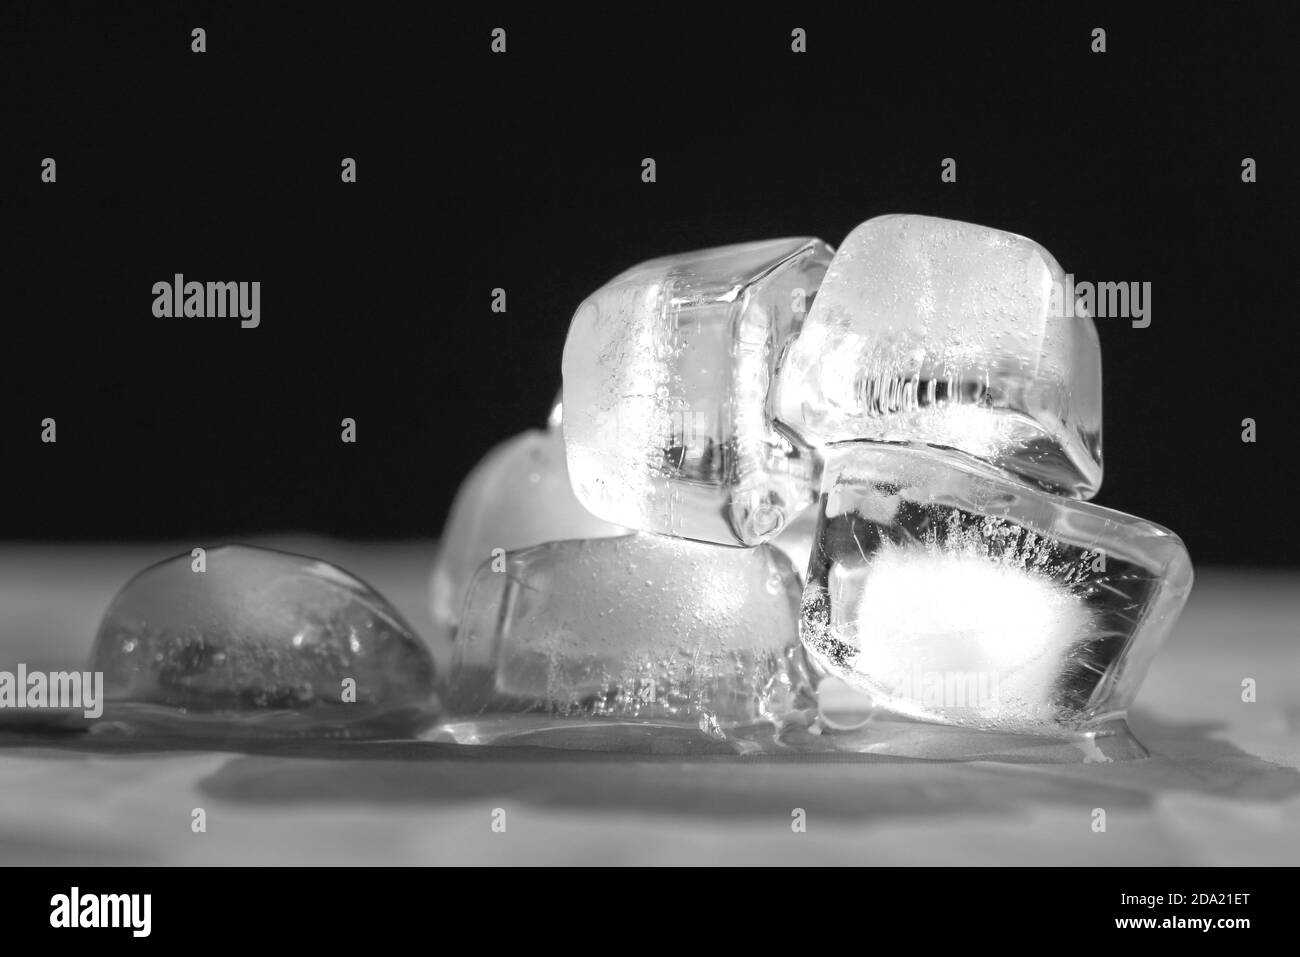 Melting ice cubes on top of table. Black background. Stock Photo